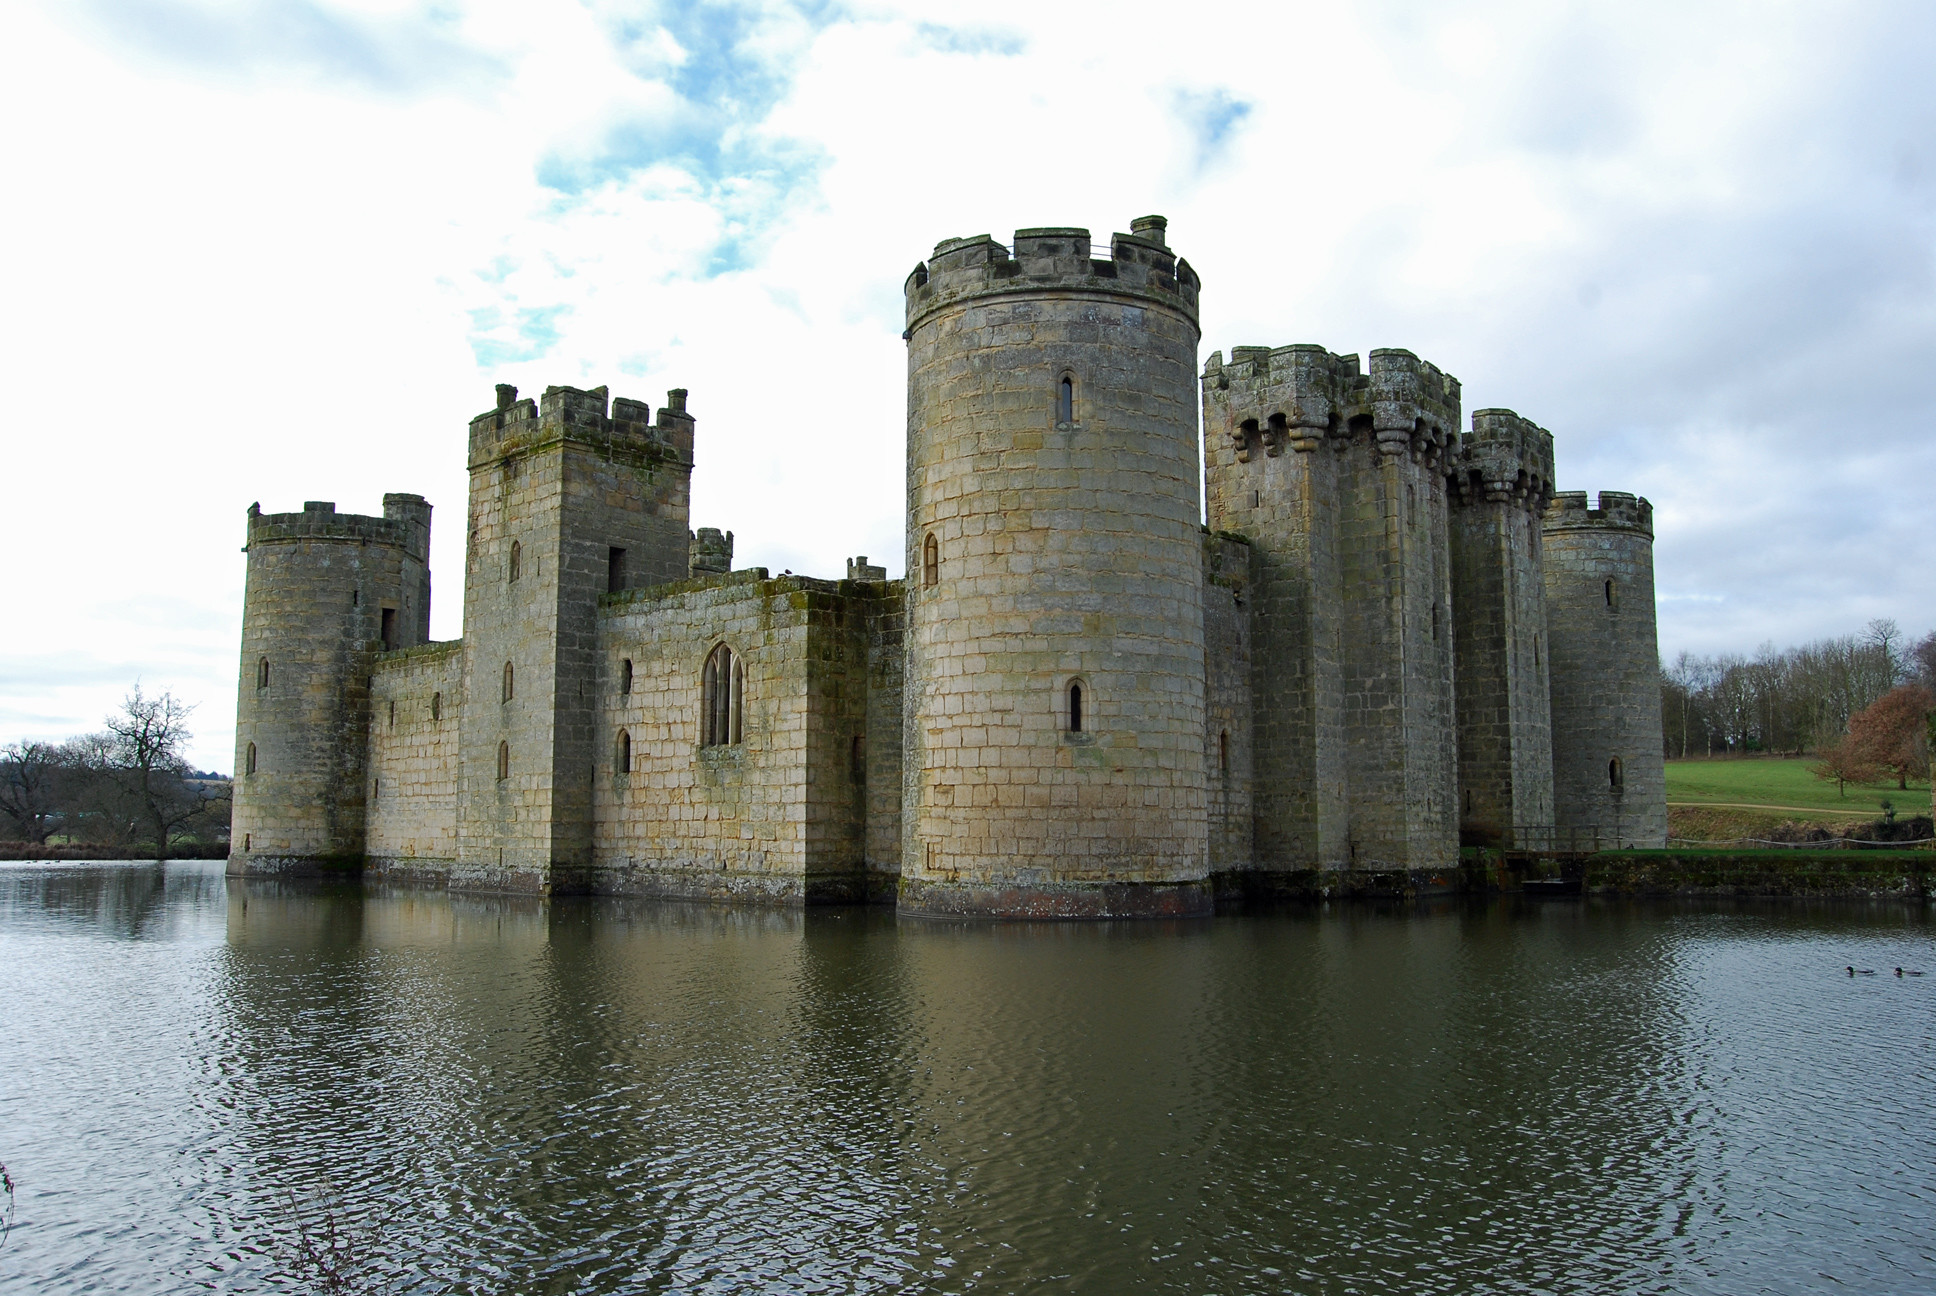 1936x1296 ENGLAND | Bodiam Castle | Now just a ruin, Bodiam Castle in East Sussex was